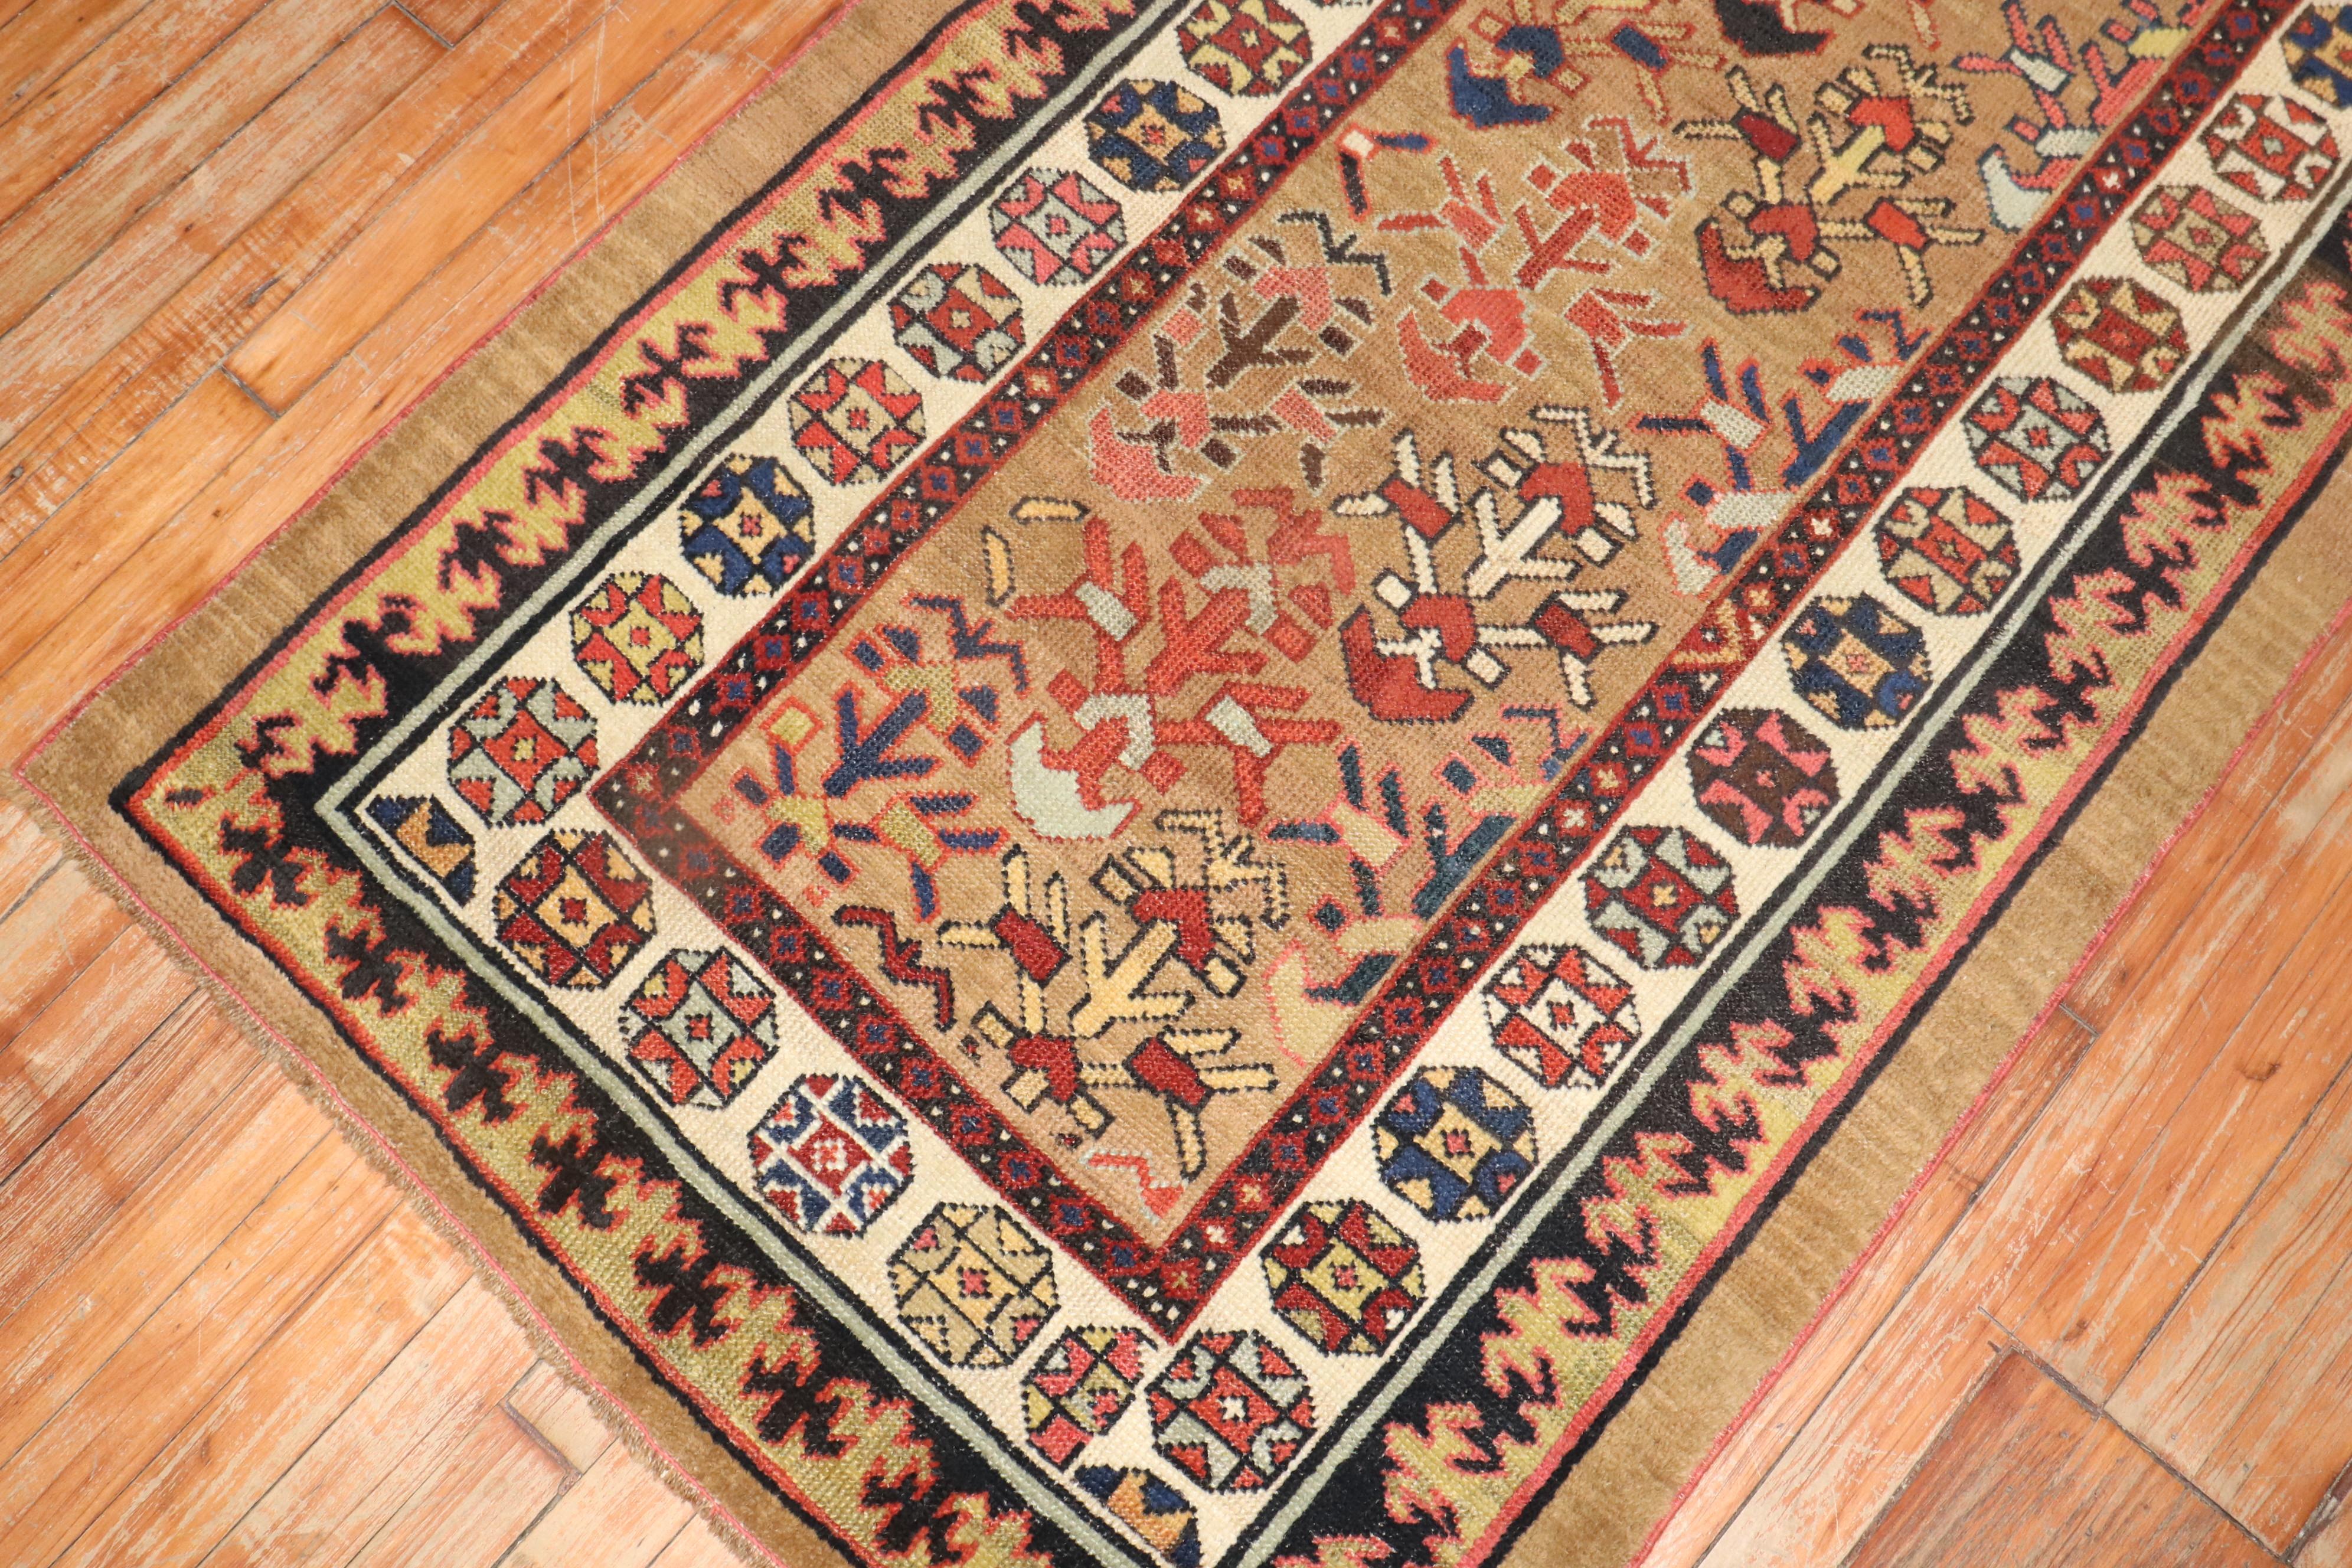 A tribal camel field Persian Bakshaish Rug runner from the early 20th century.

Measures: 3'2'' x 11'


The 19th century examples of Bakshaish weavings are memorable in their beauty, and in good condition, have performed very solidly as art